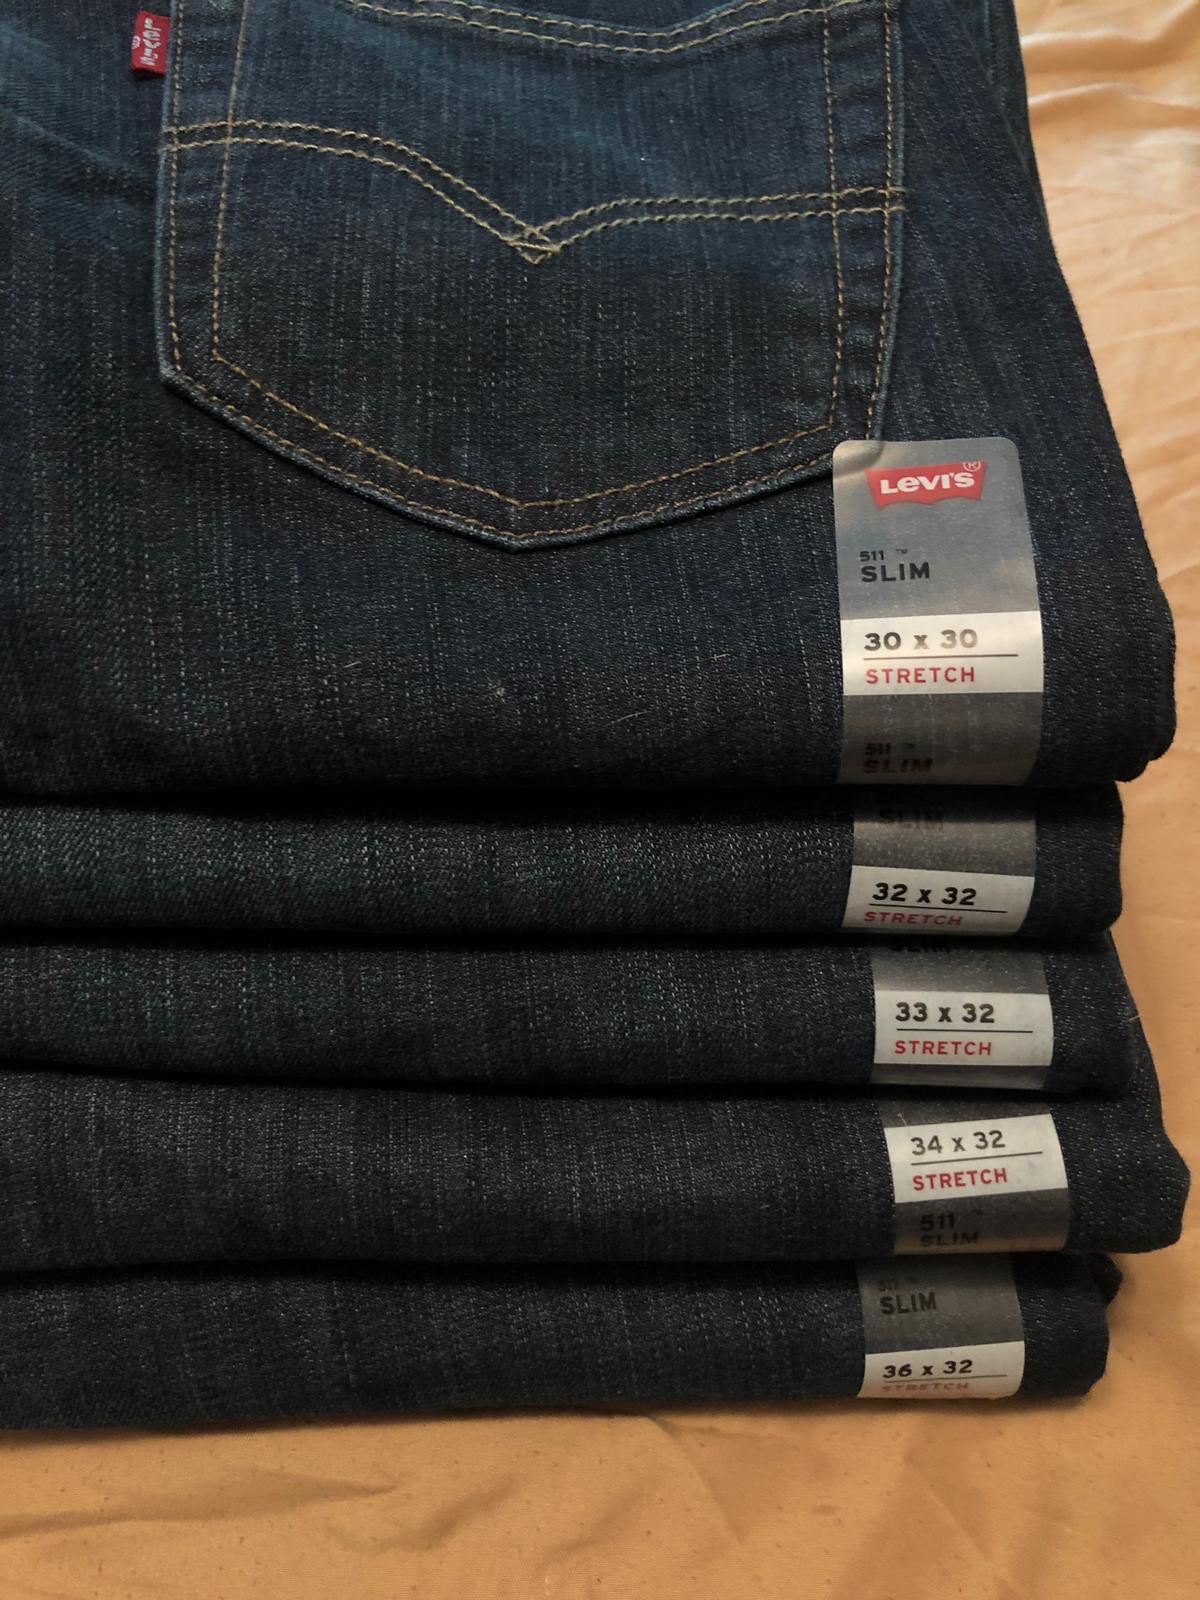 Levis man Slim Stretch Jeans from 30x30-36x32 ! Read description up for trade